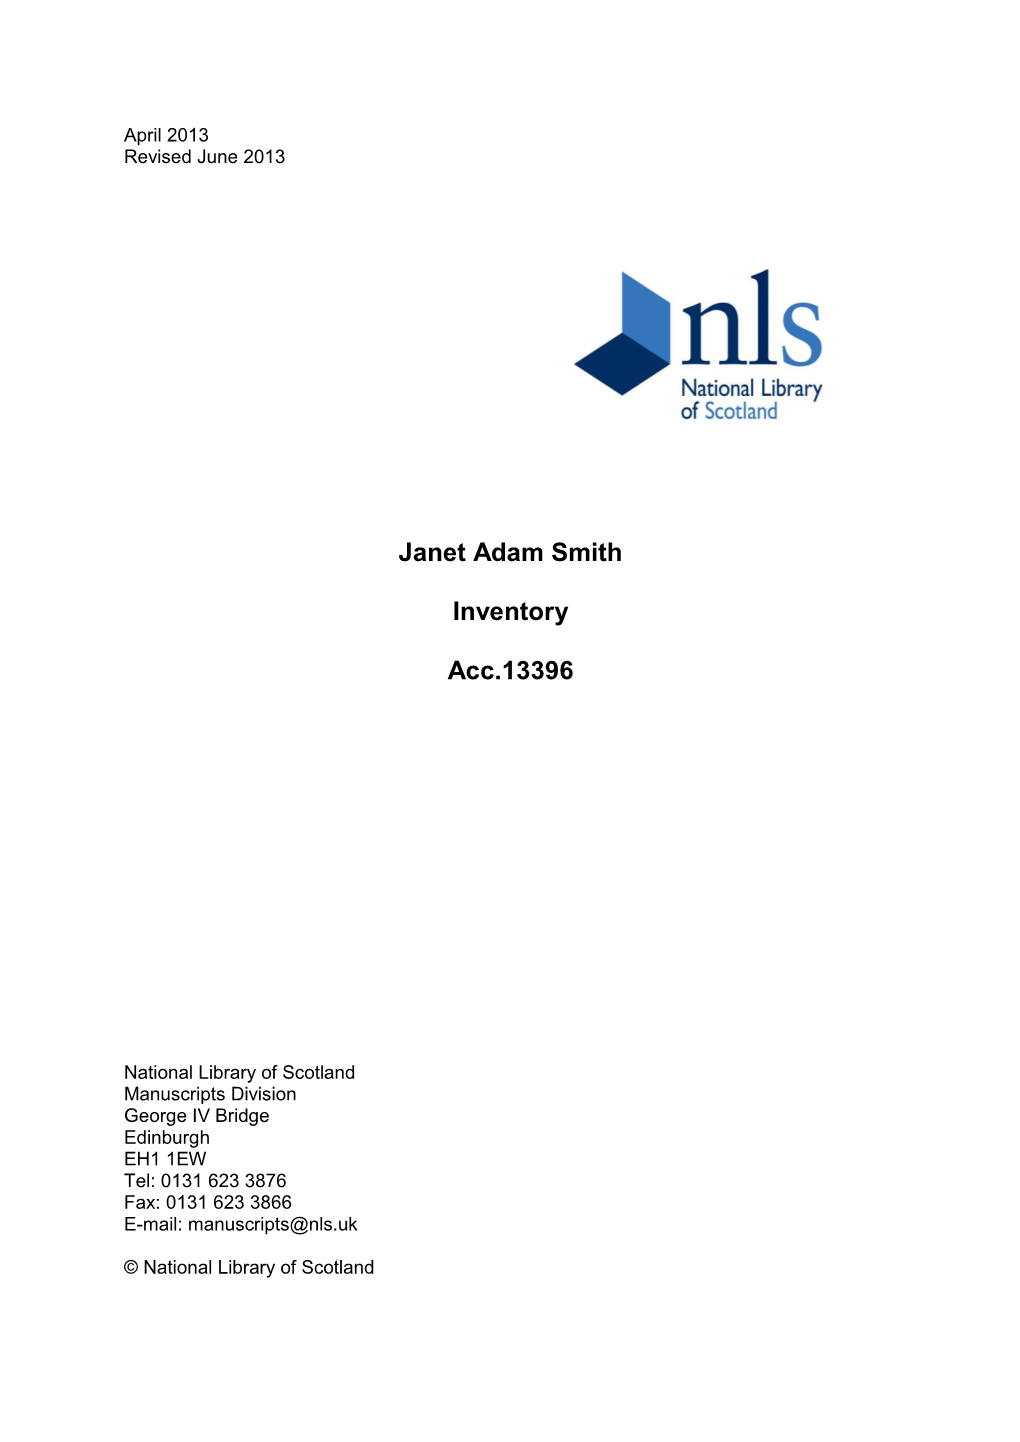 Janet Adam Smith Inventory Acc.13396